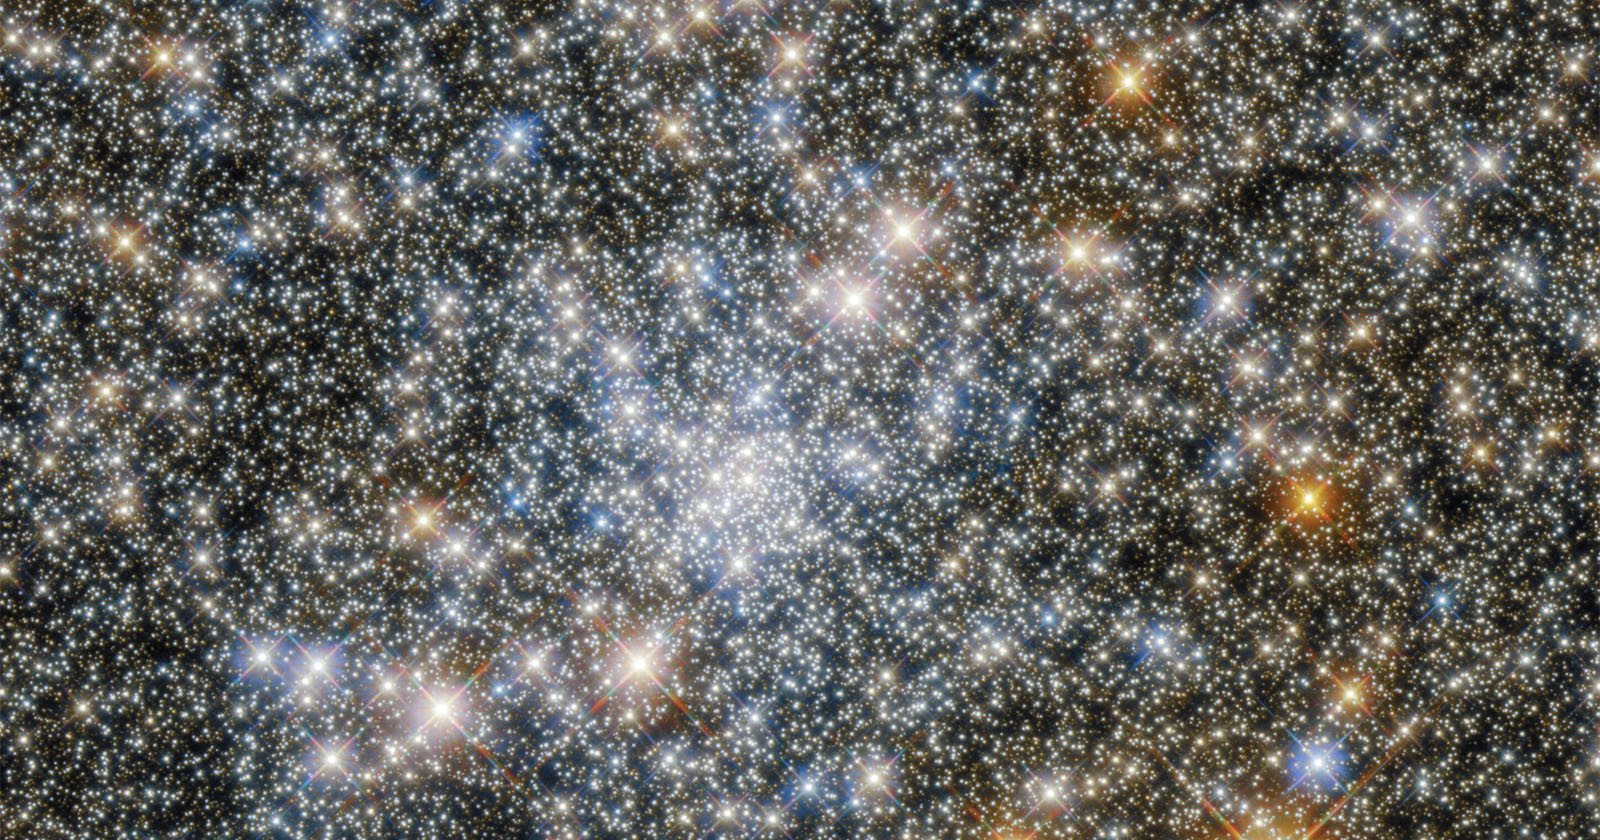 Hubble Photographs a Glittering Star Cluster